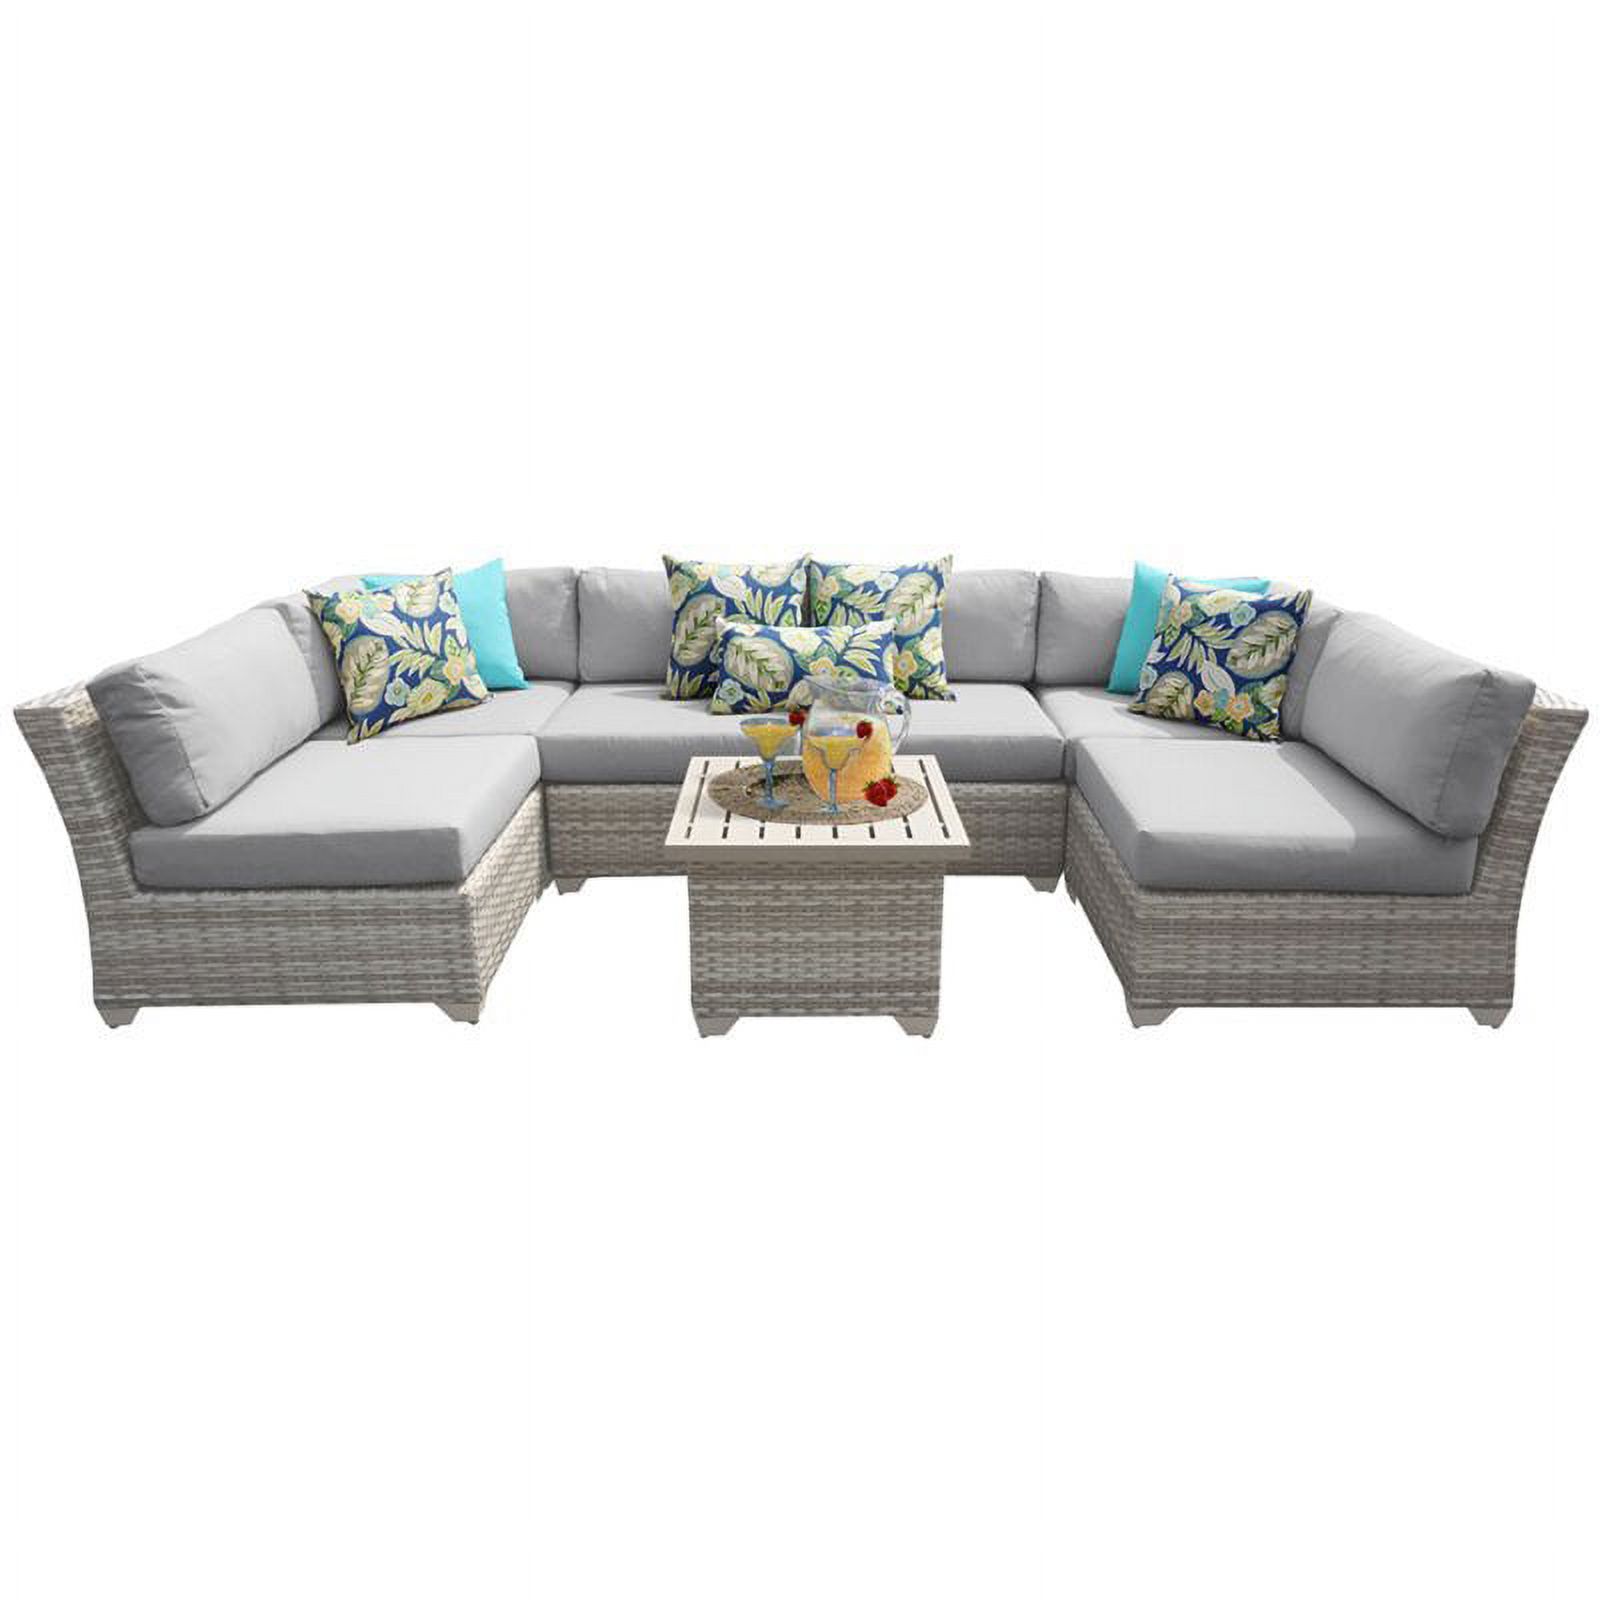 Bowery Hill 7 Piece Patio Wicker Sectional Set in Gray - image 1 of 1